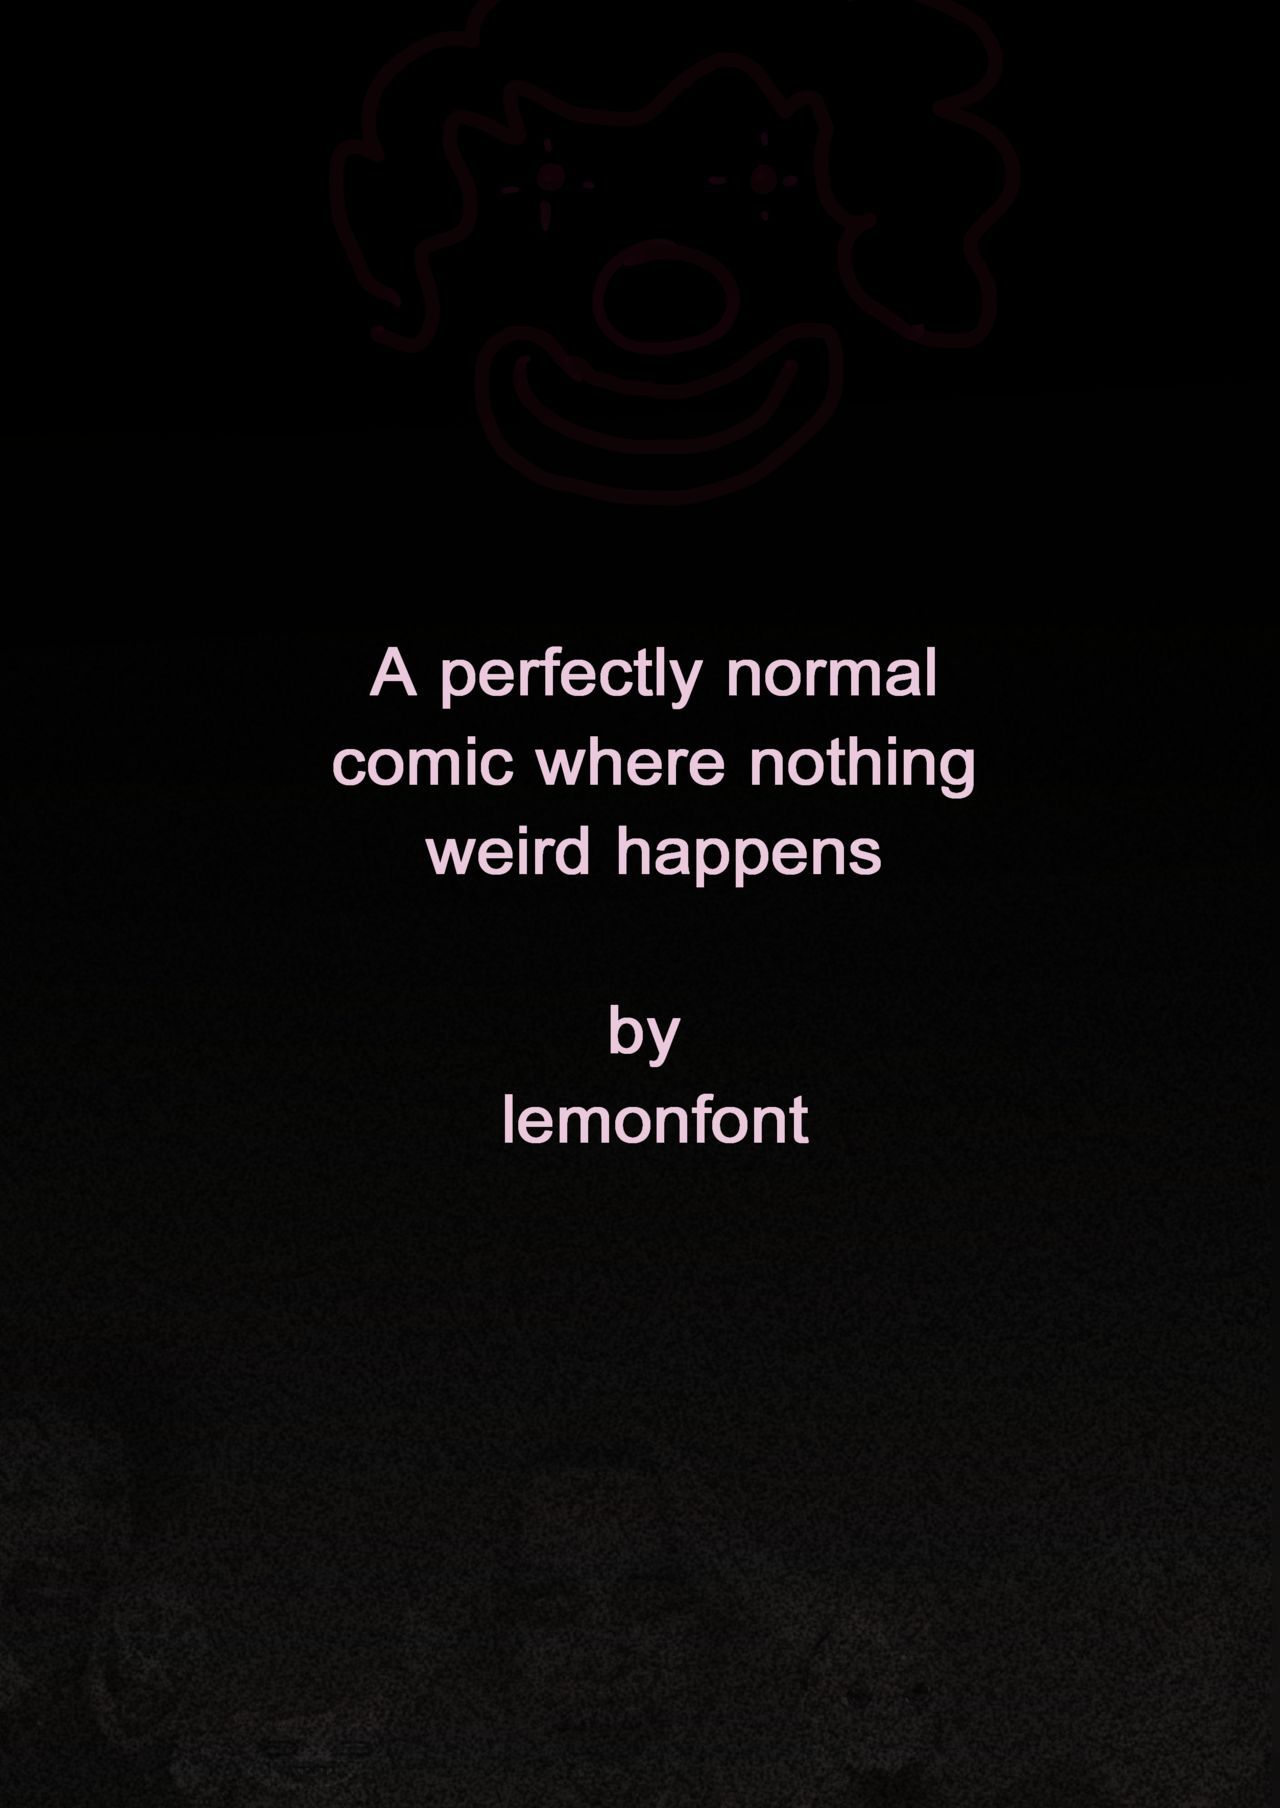 [Lemonfont] A perfectly normal comic where nothing weird happens(in progress) 1